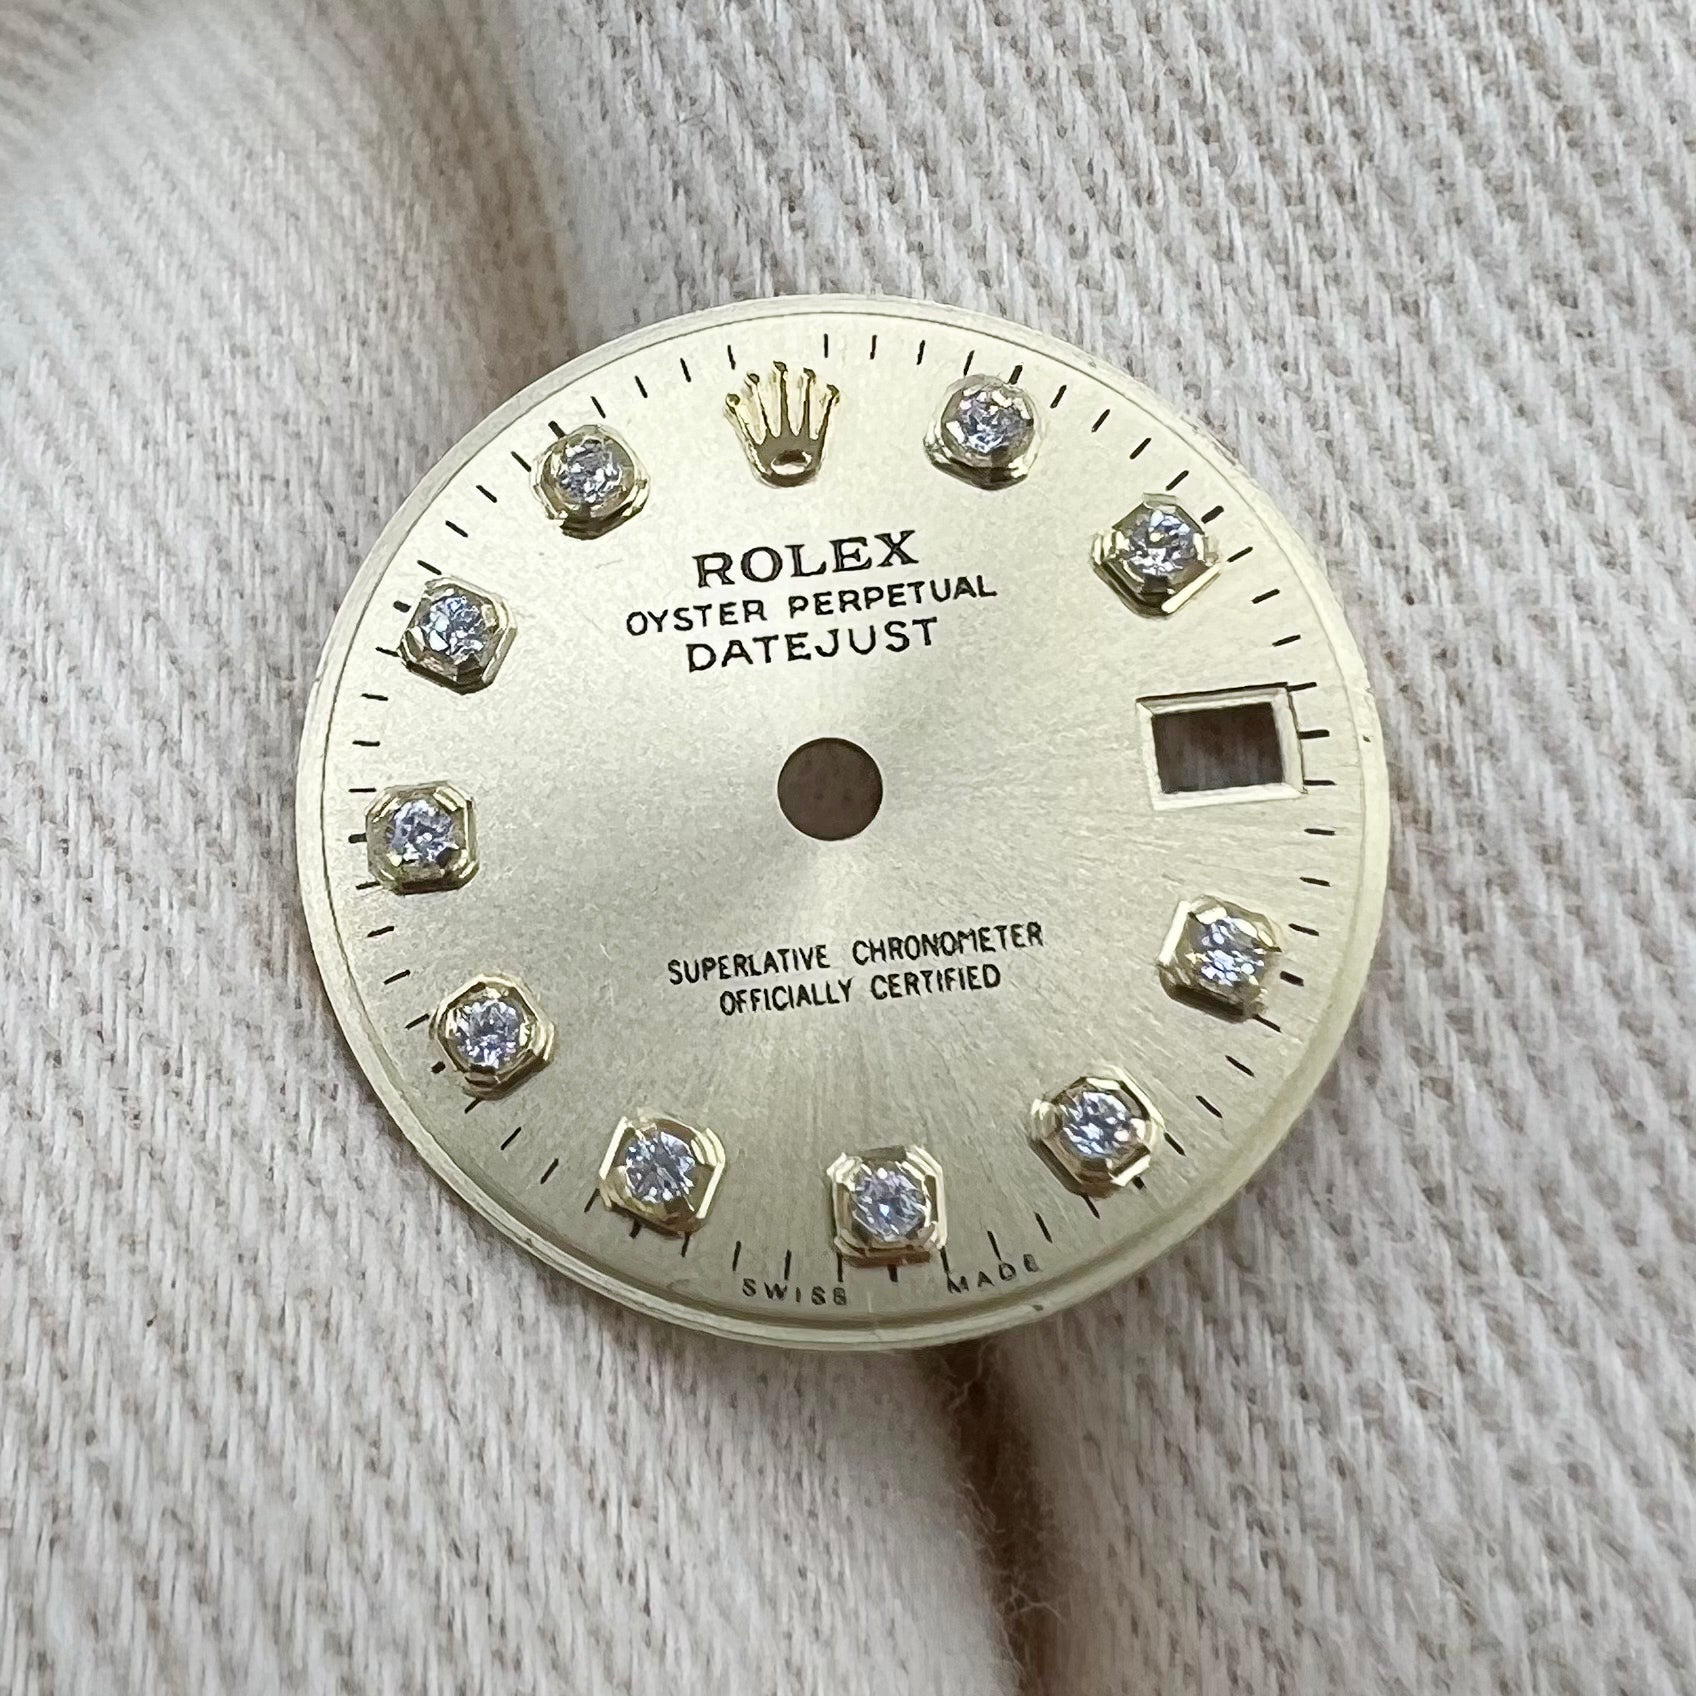 Rolex Oyster Perpetual Date Just Gold 10pt Diamond With Gold Border Dial 26mm